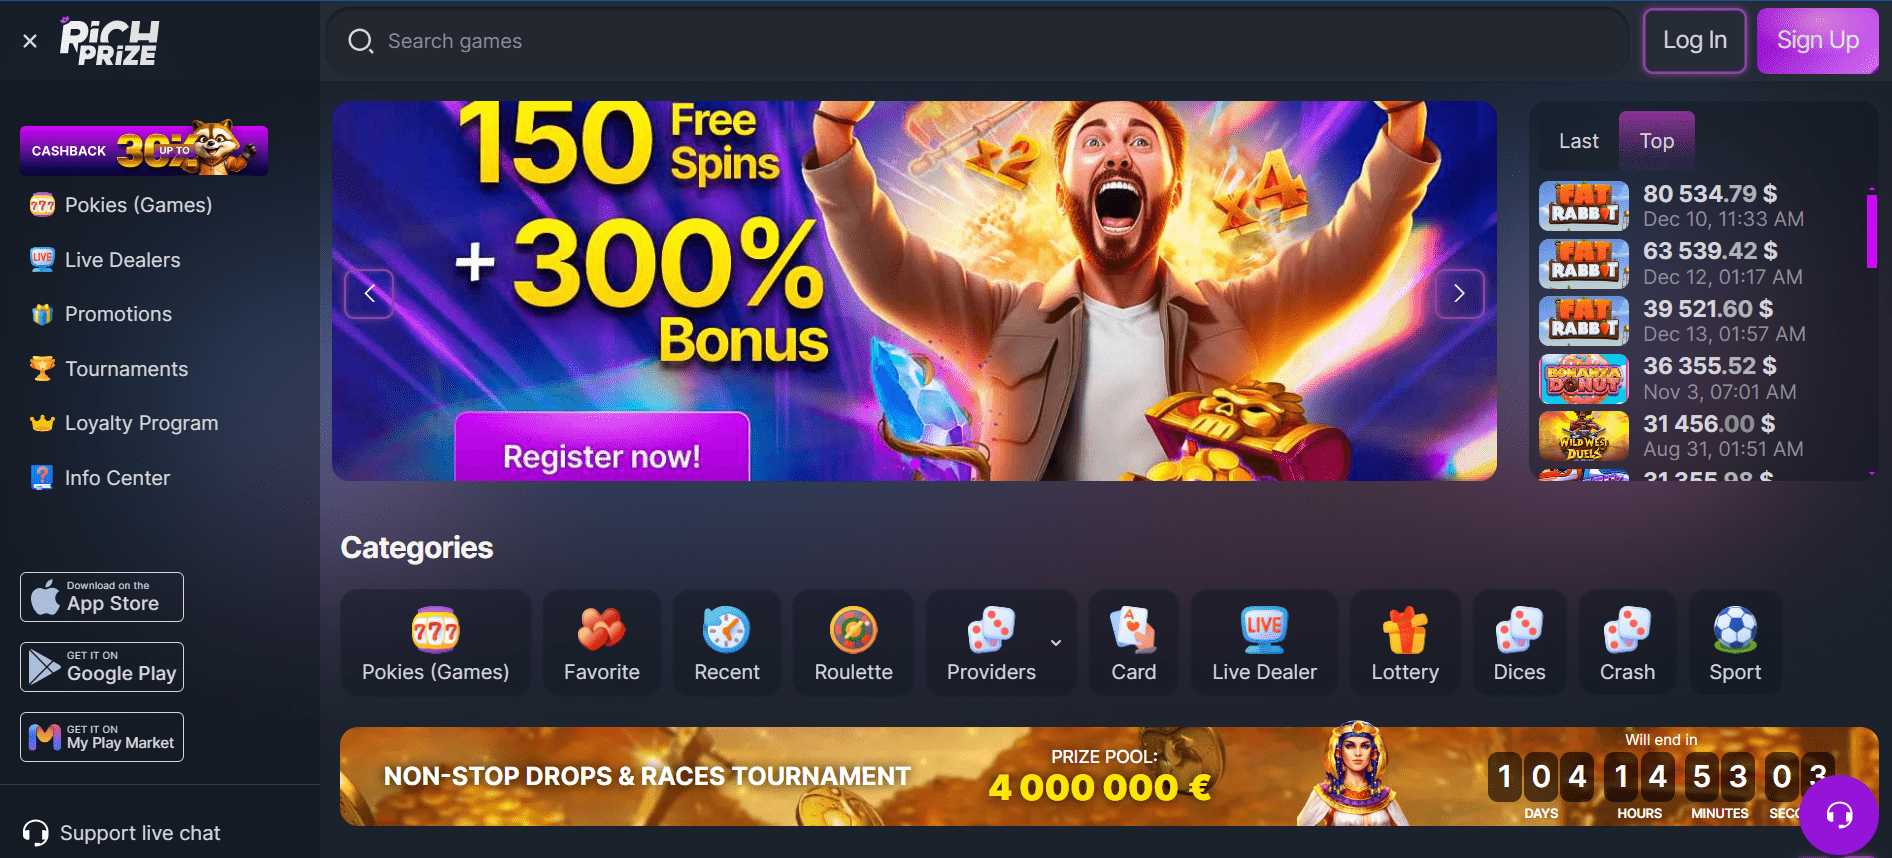 Rich Prize Casino Review